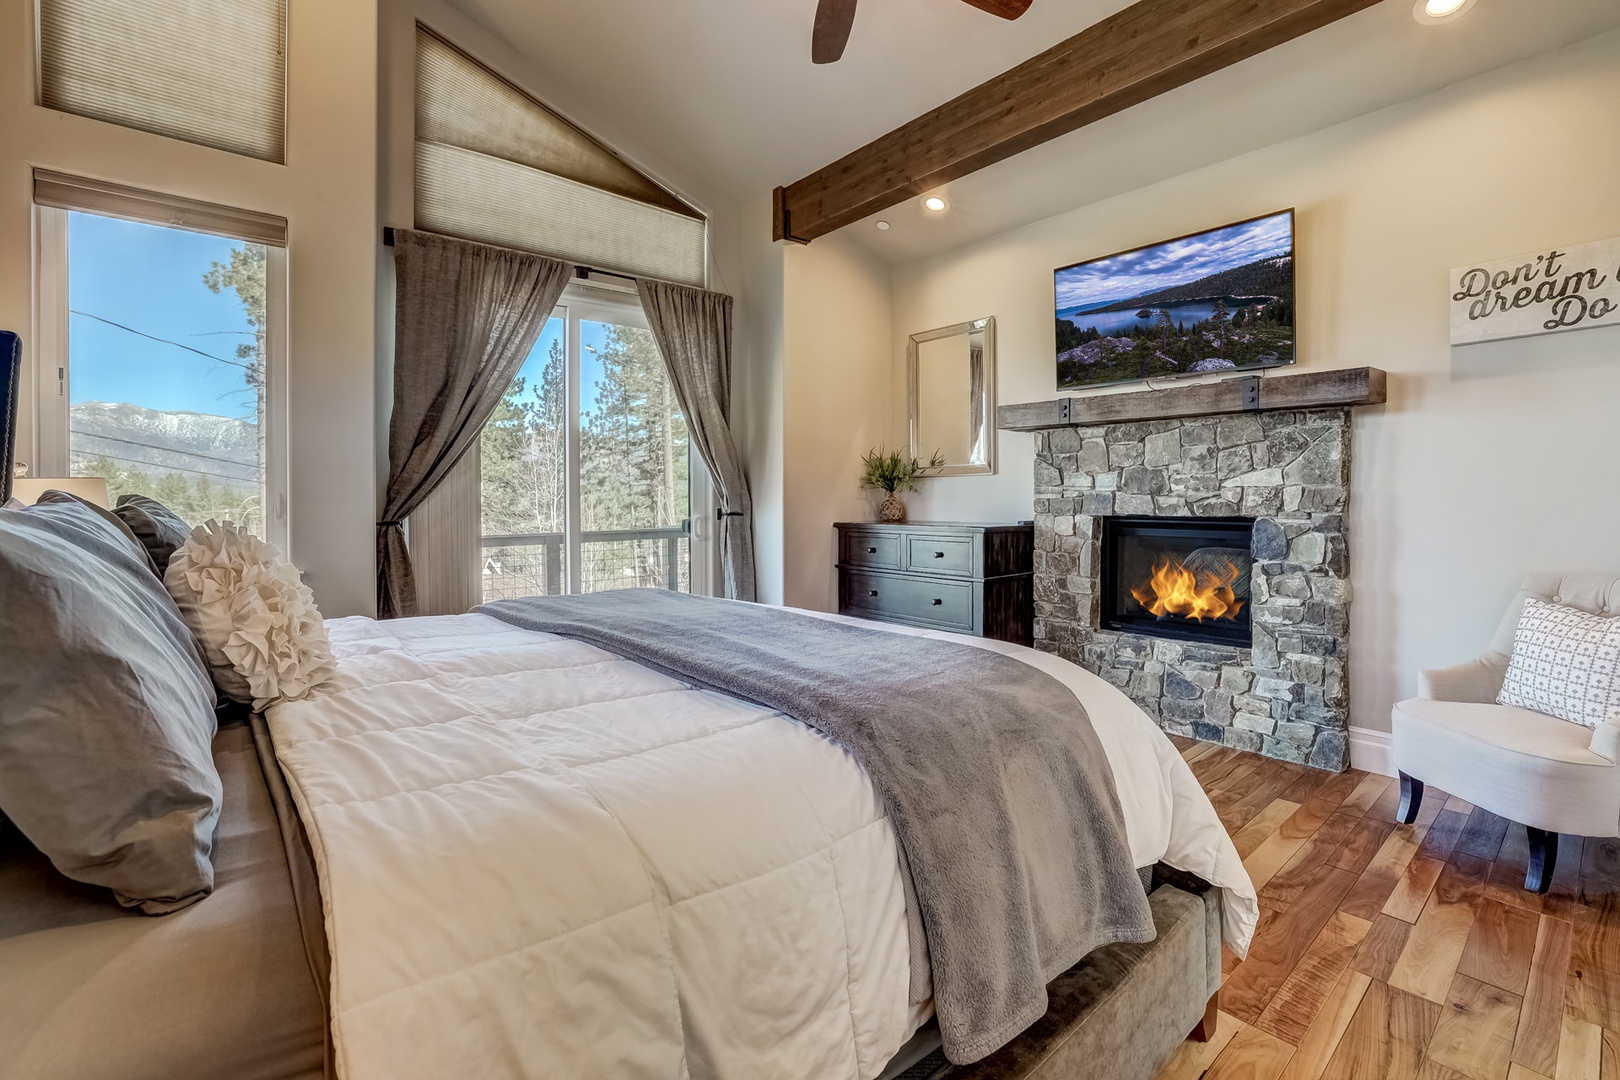 Master bedroom with fireplace and en-suite bathroom